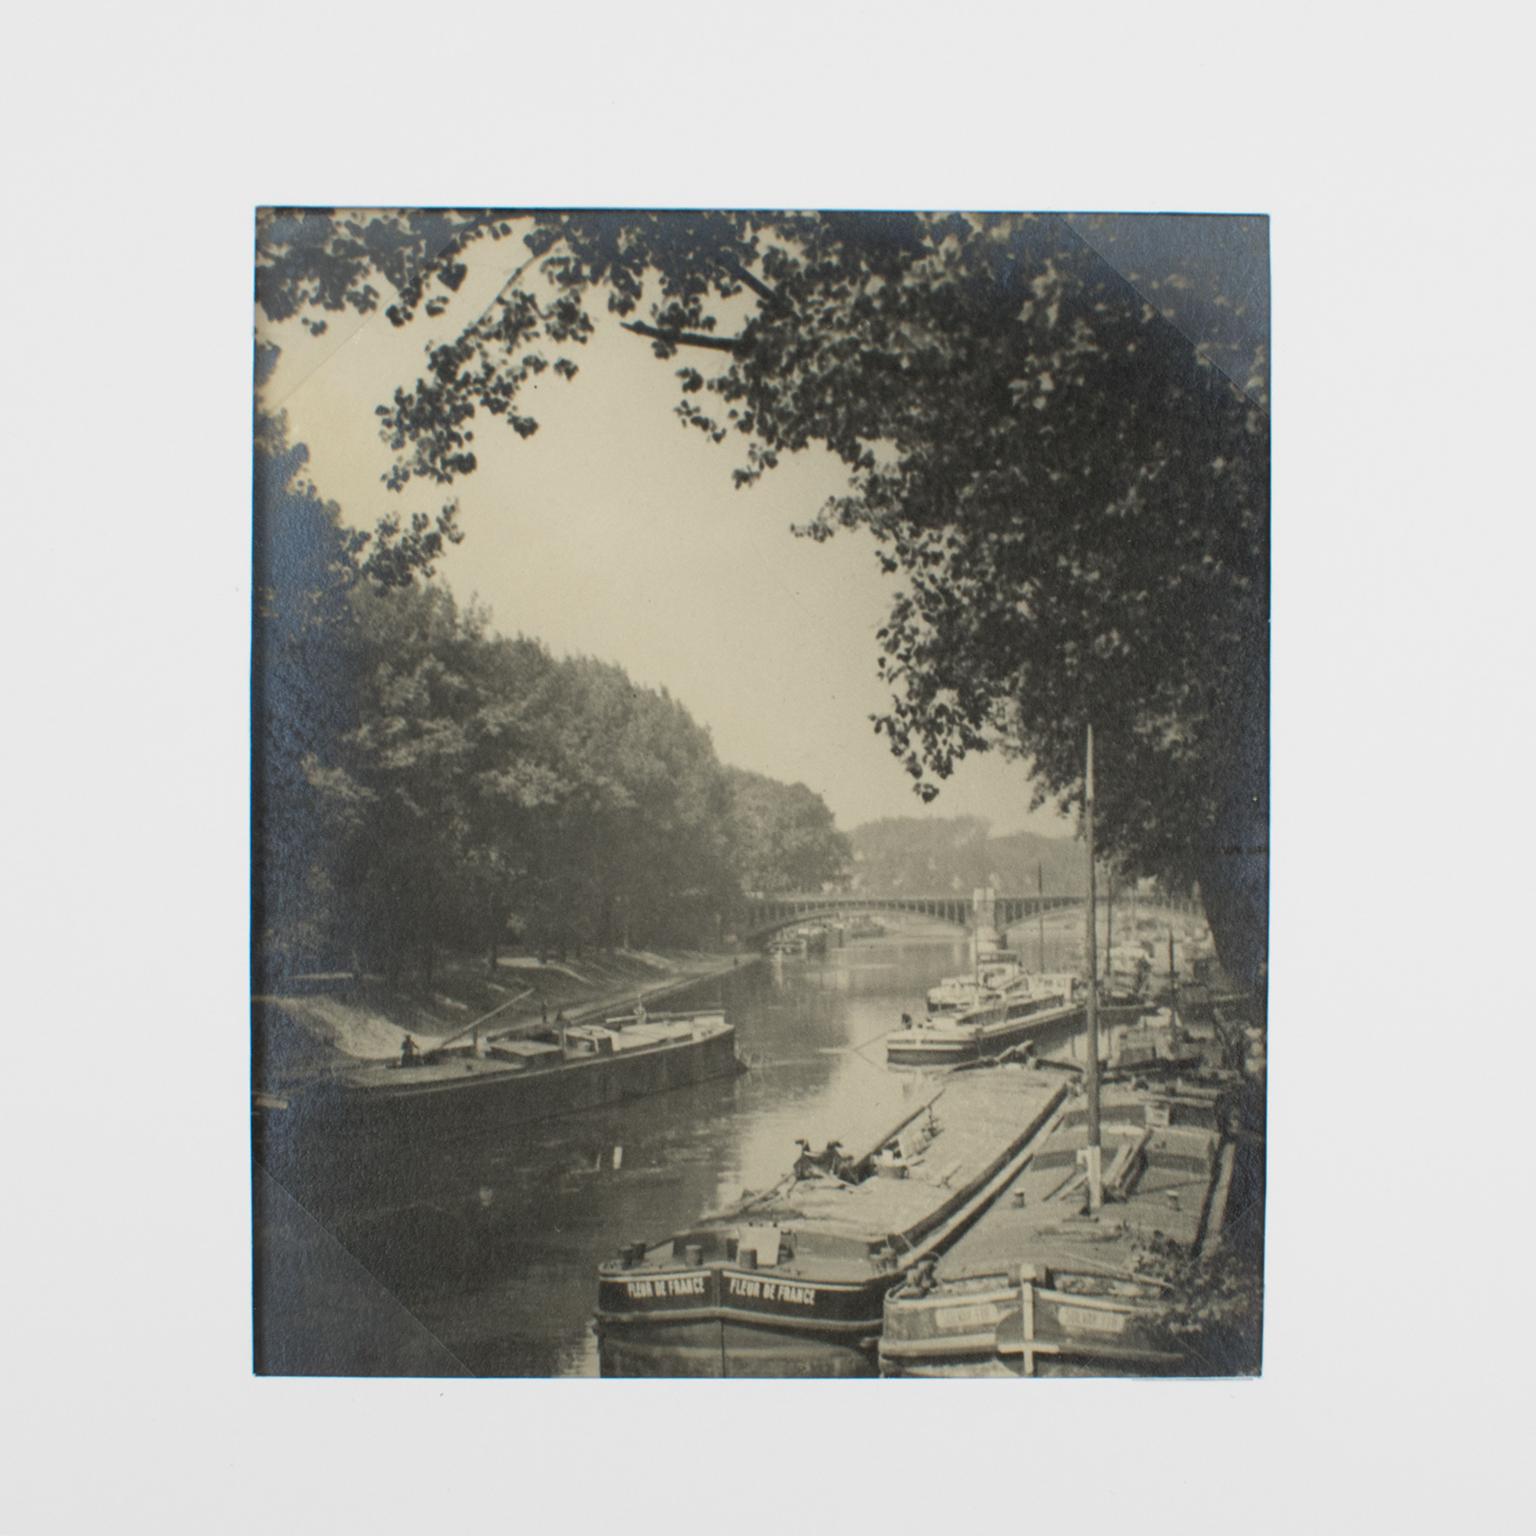 A unique original silver gelatin black and white photograph. View of Charenton le Pont, east suburb of Paris, France, June 1926. 
This original photograph shows a view of the canal with its barge boats in Charenton le Pont, an east suburb of Paris,